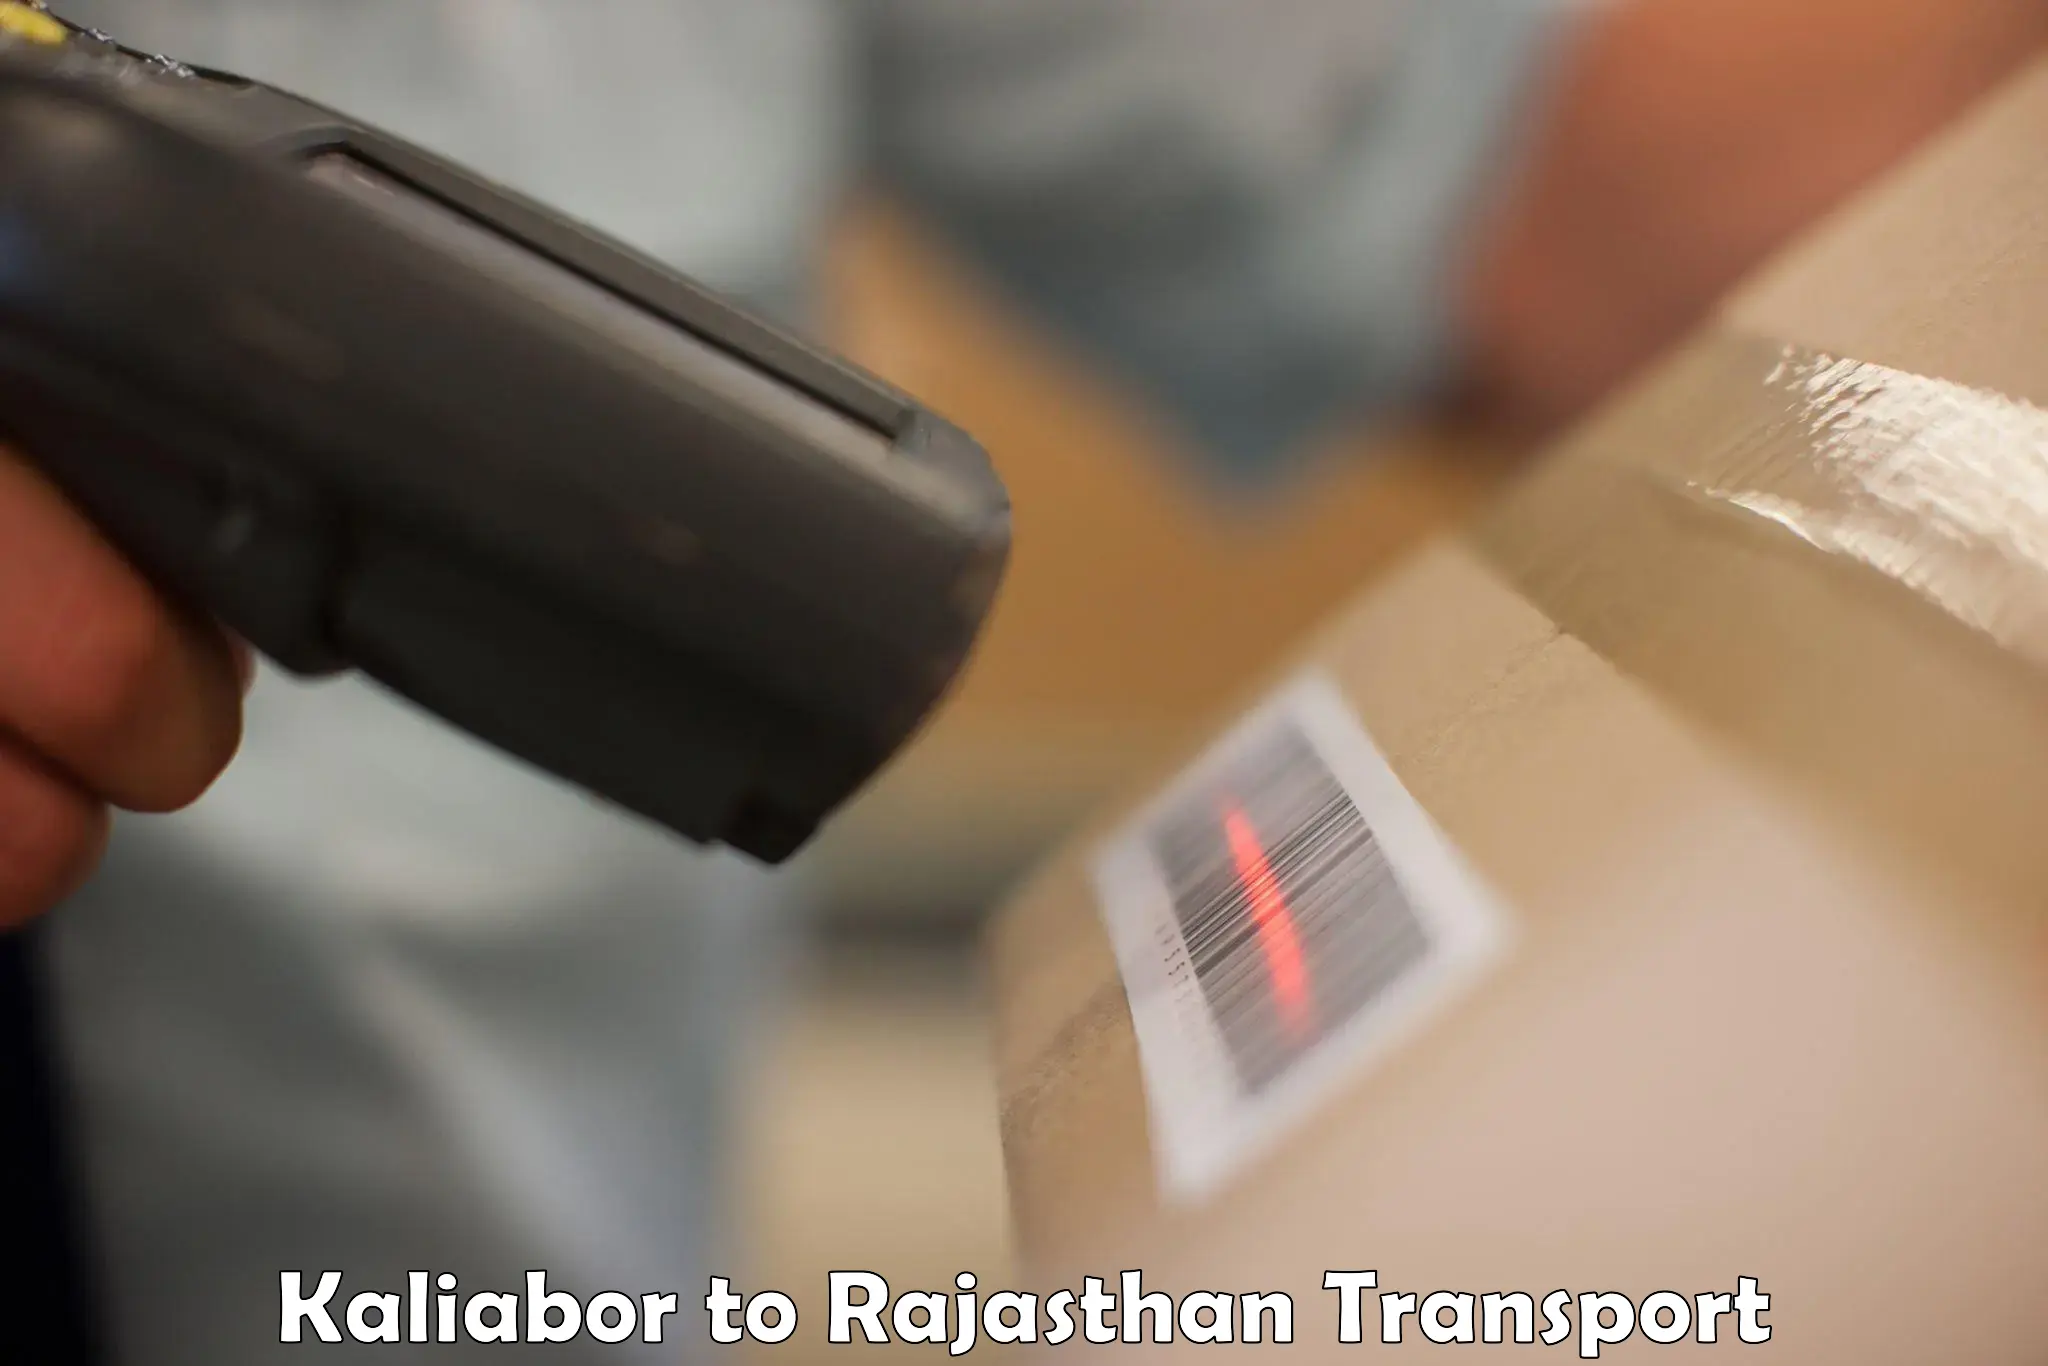 Air cargo transport services Kaliabor to Udaipur